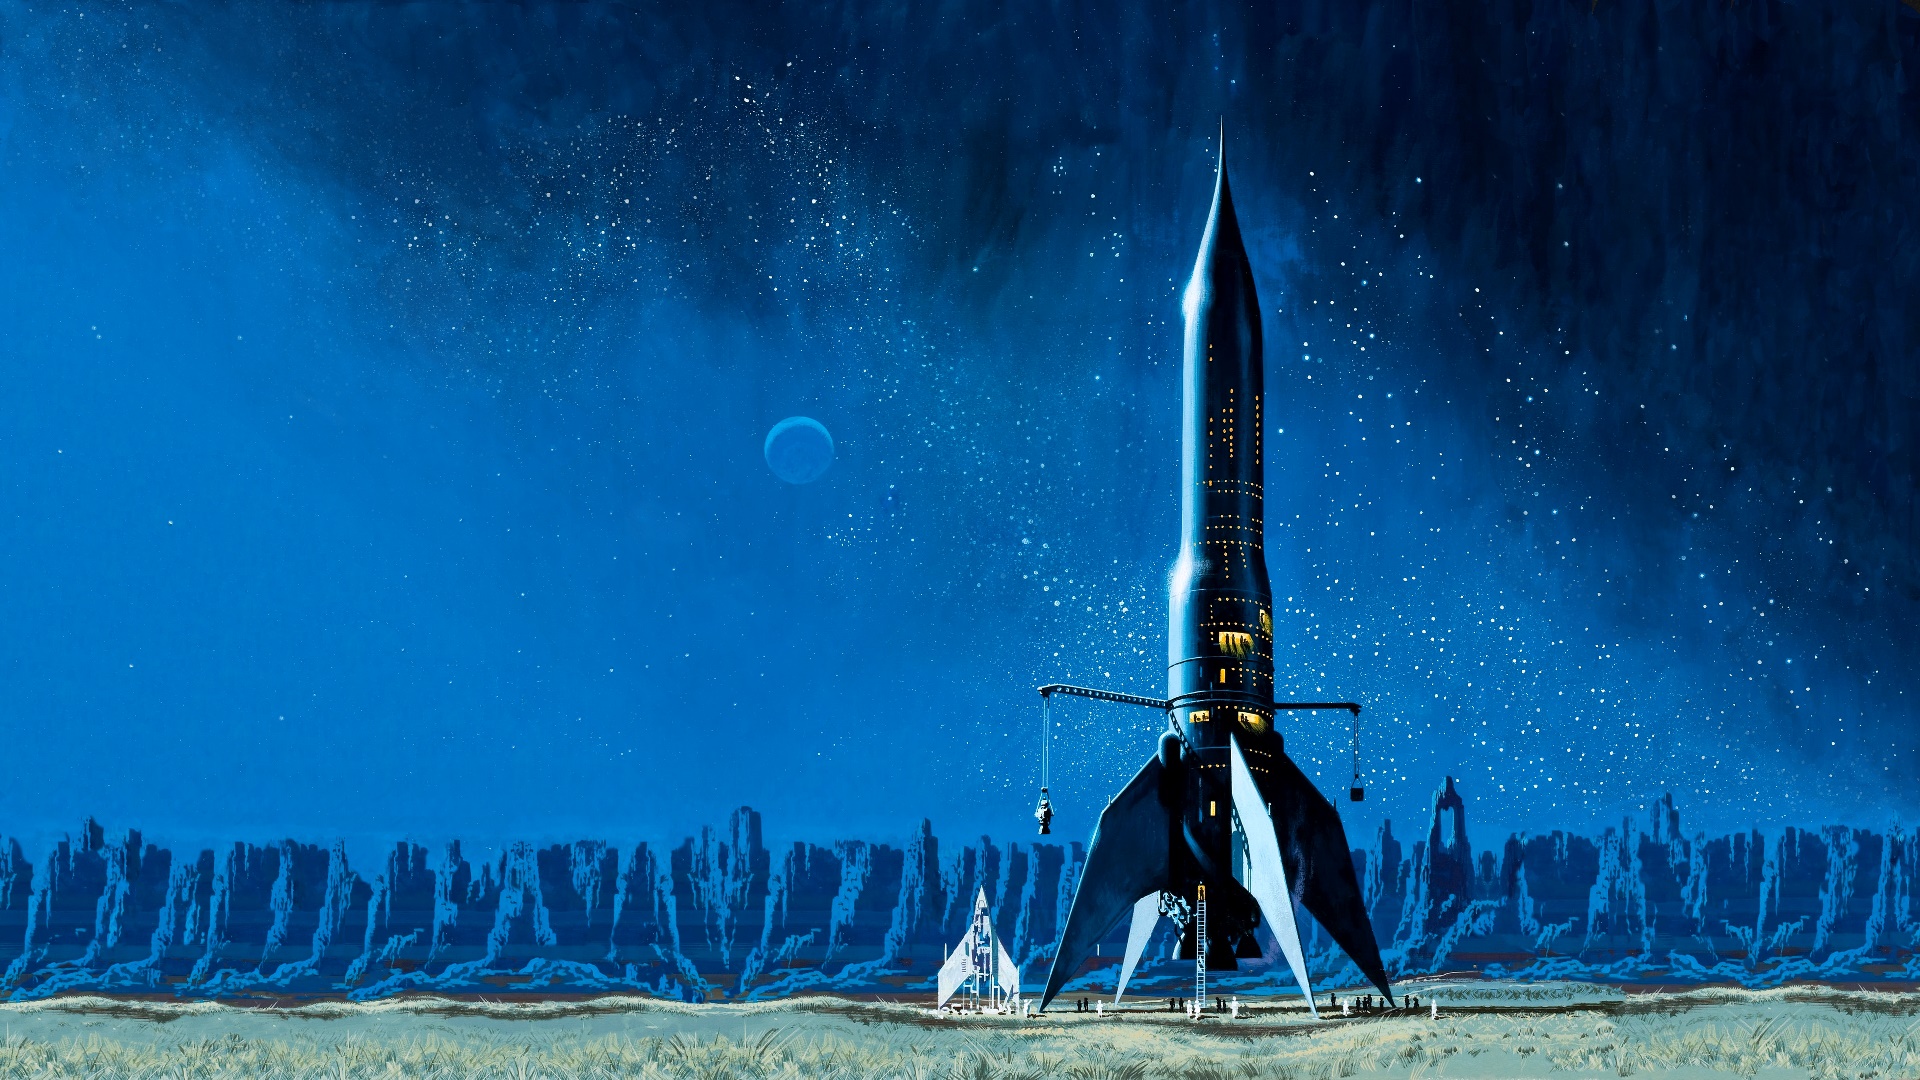 Artwork Painting Science Fiction Space Ship Blue Moon 1920x1080